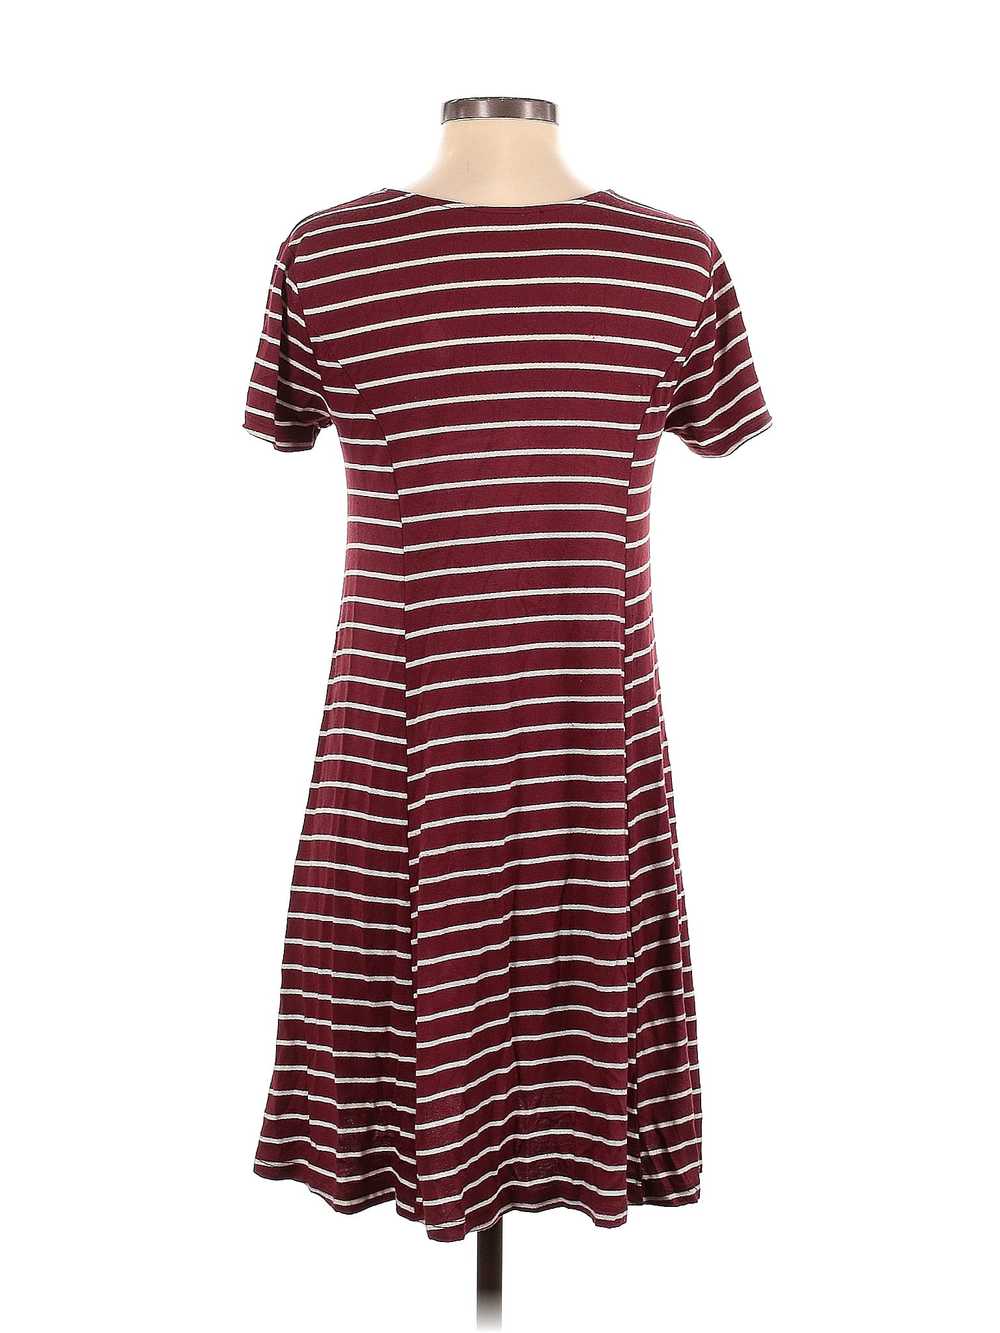 Unbranded Women Red Casual Dress S - image 2